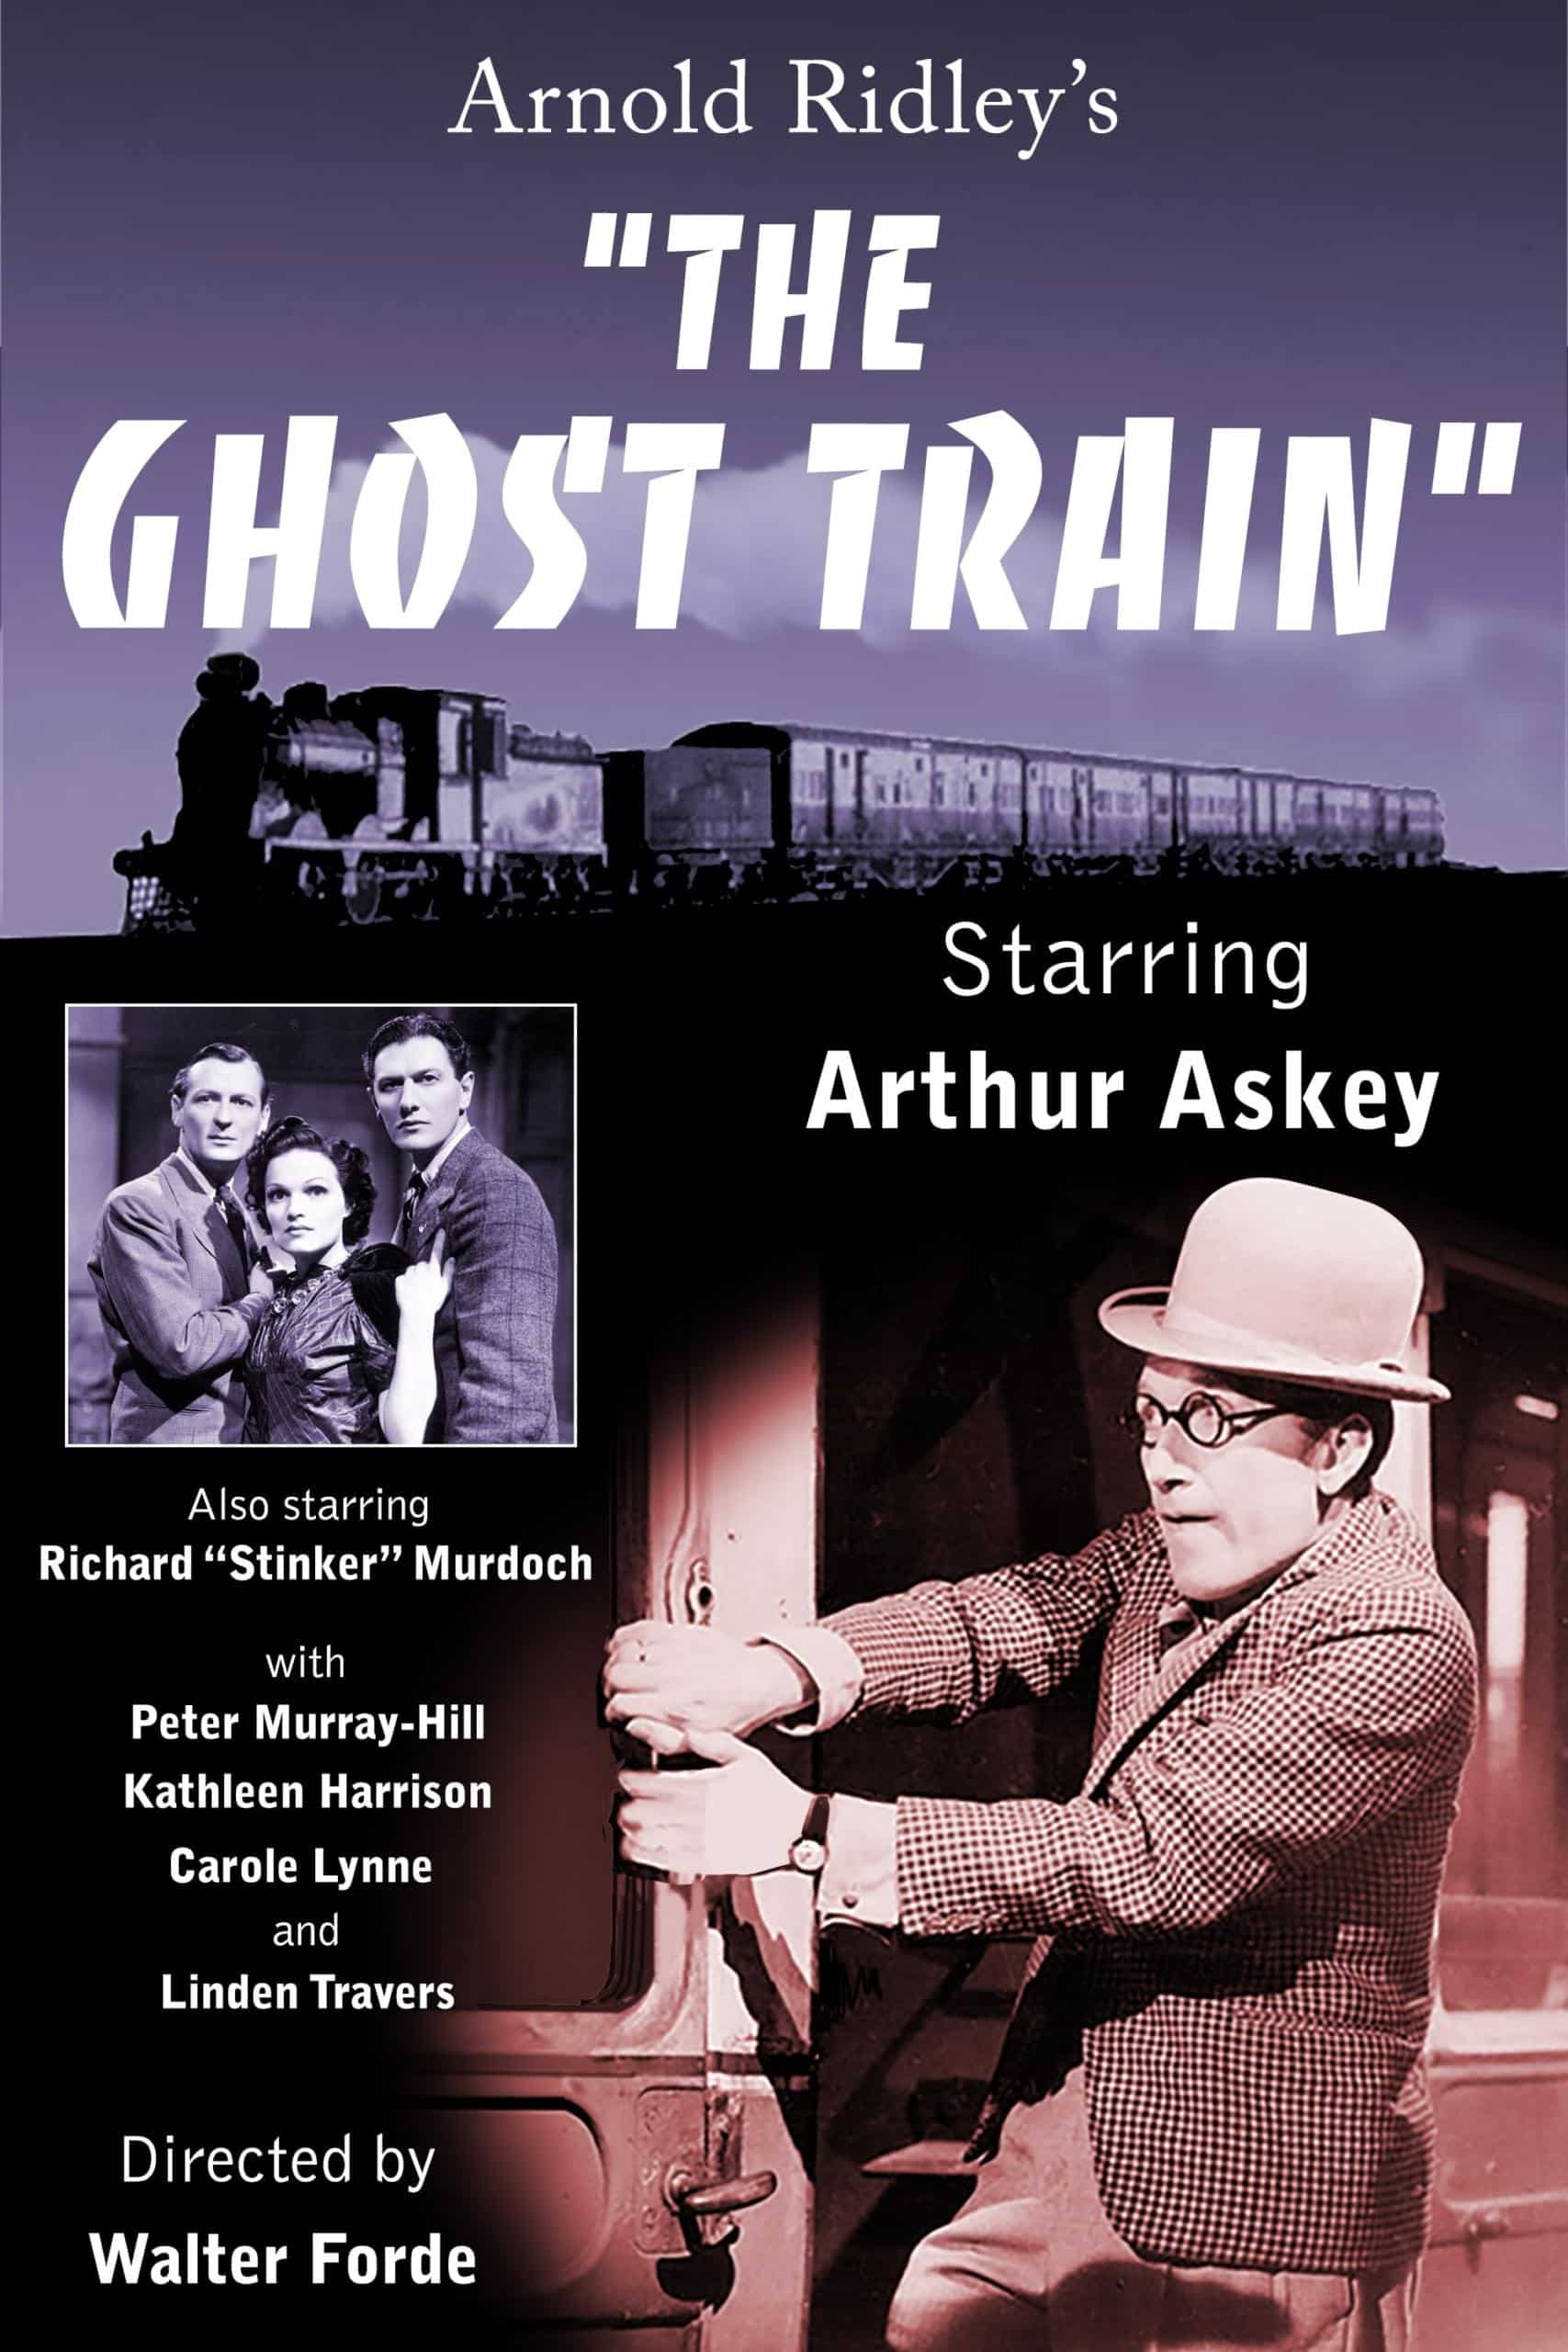 Poster for the movie "The Ghost Train"